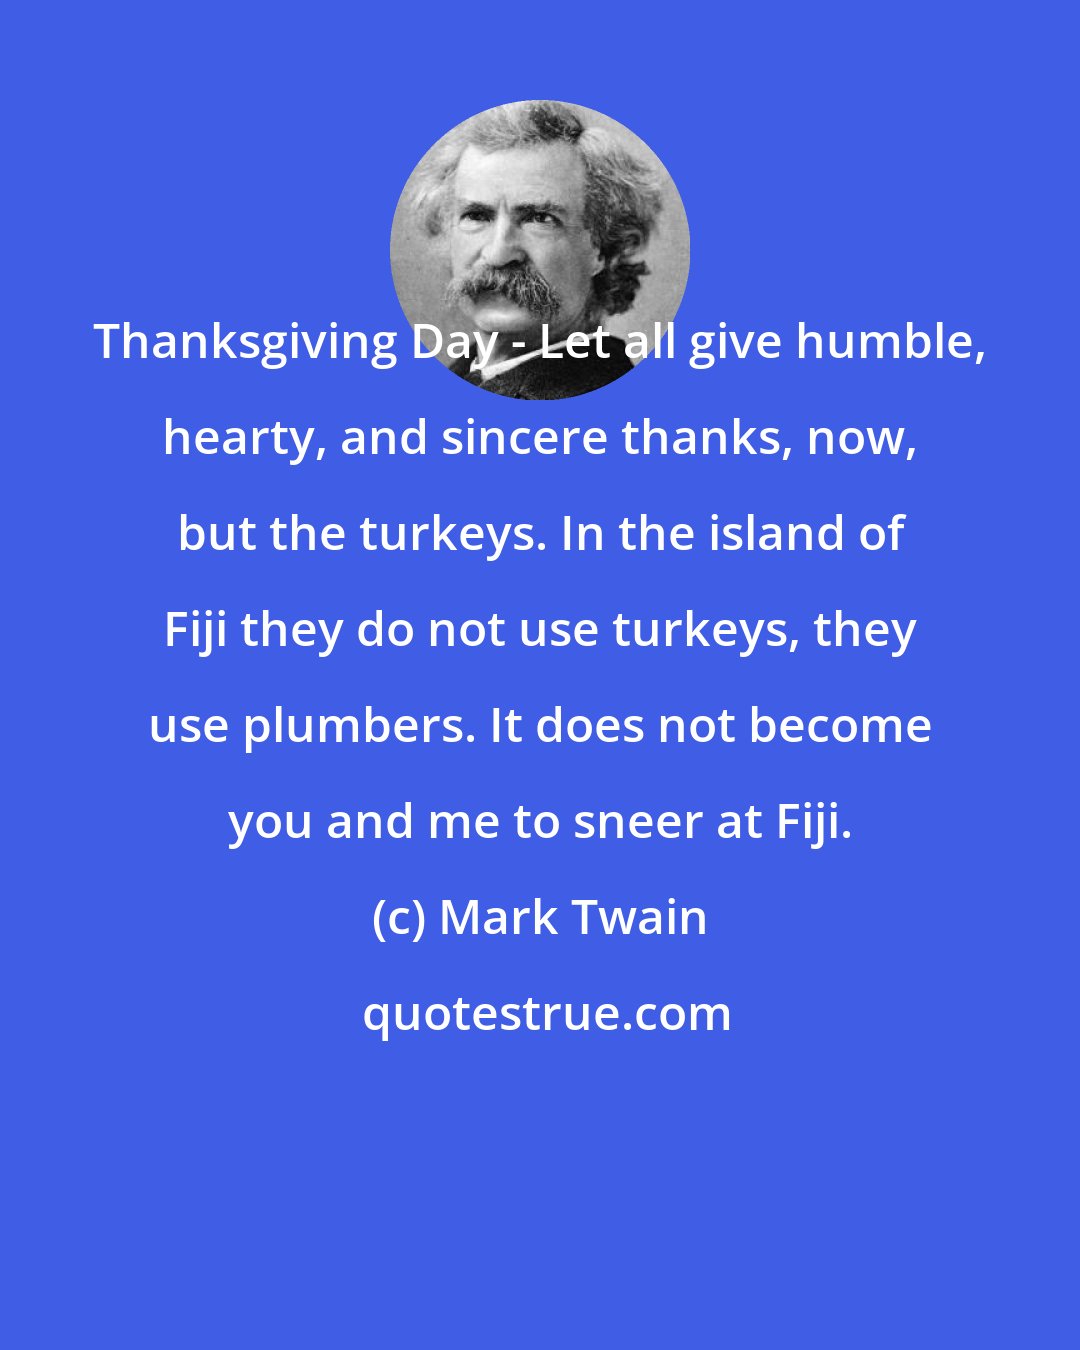 Mark Twain: Thanksgiving Day - Let all give humble, hearty, and sincere thanks, now, but the turkeys. In the island of Fiji they do not use turkeys, they use plumbers. It does not become you and me to sneer at Fiji.